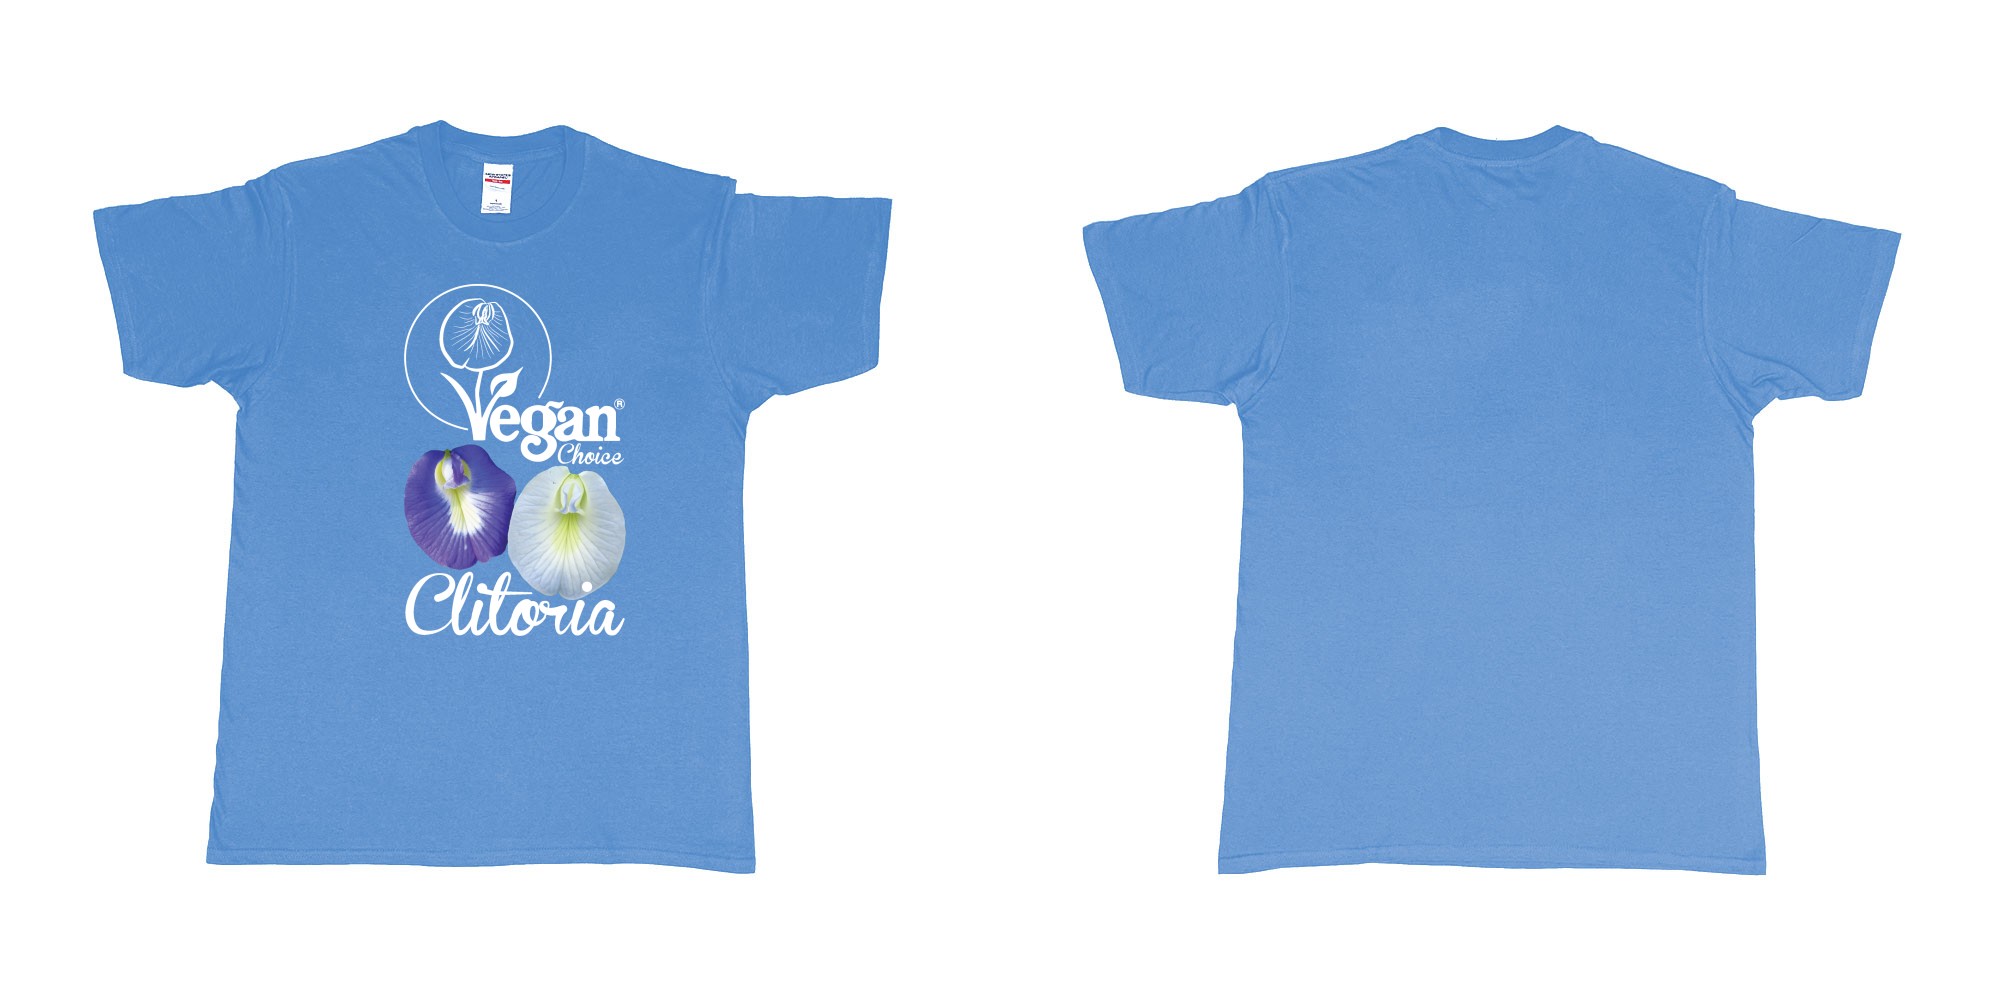 Custom tshirt design vegan choice clitoria flowers in fabric color carolina-blue choice your own text made in Bali by The Pirate Way